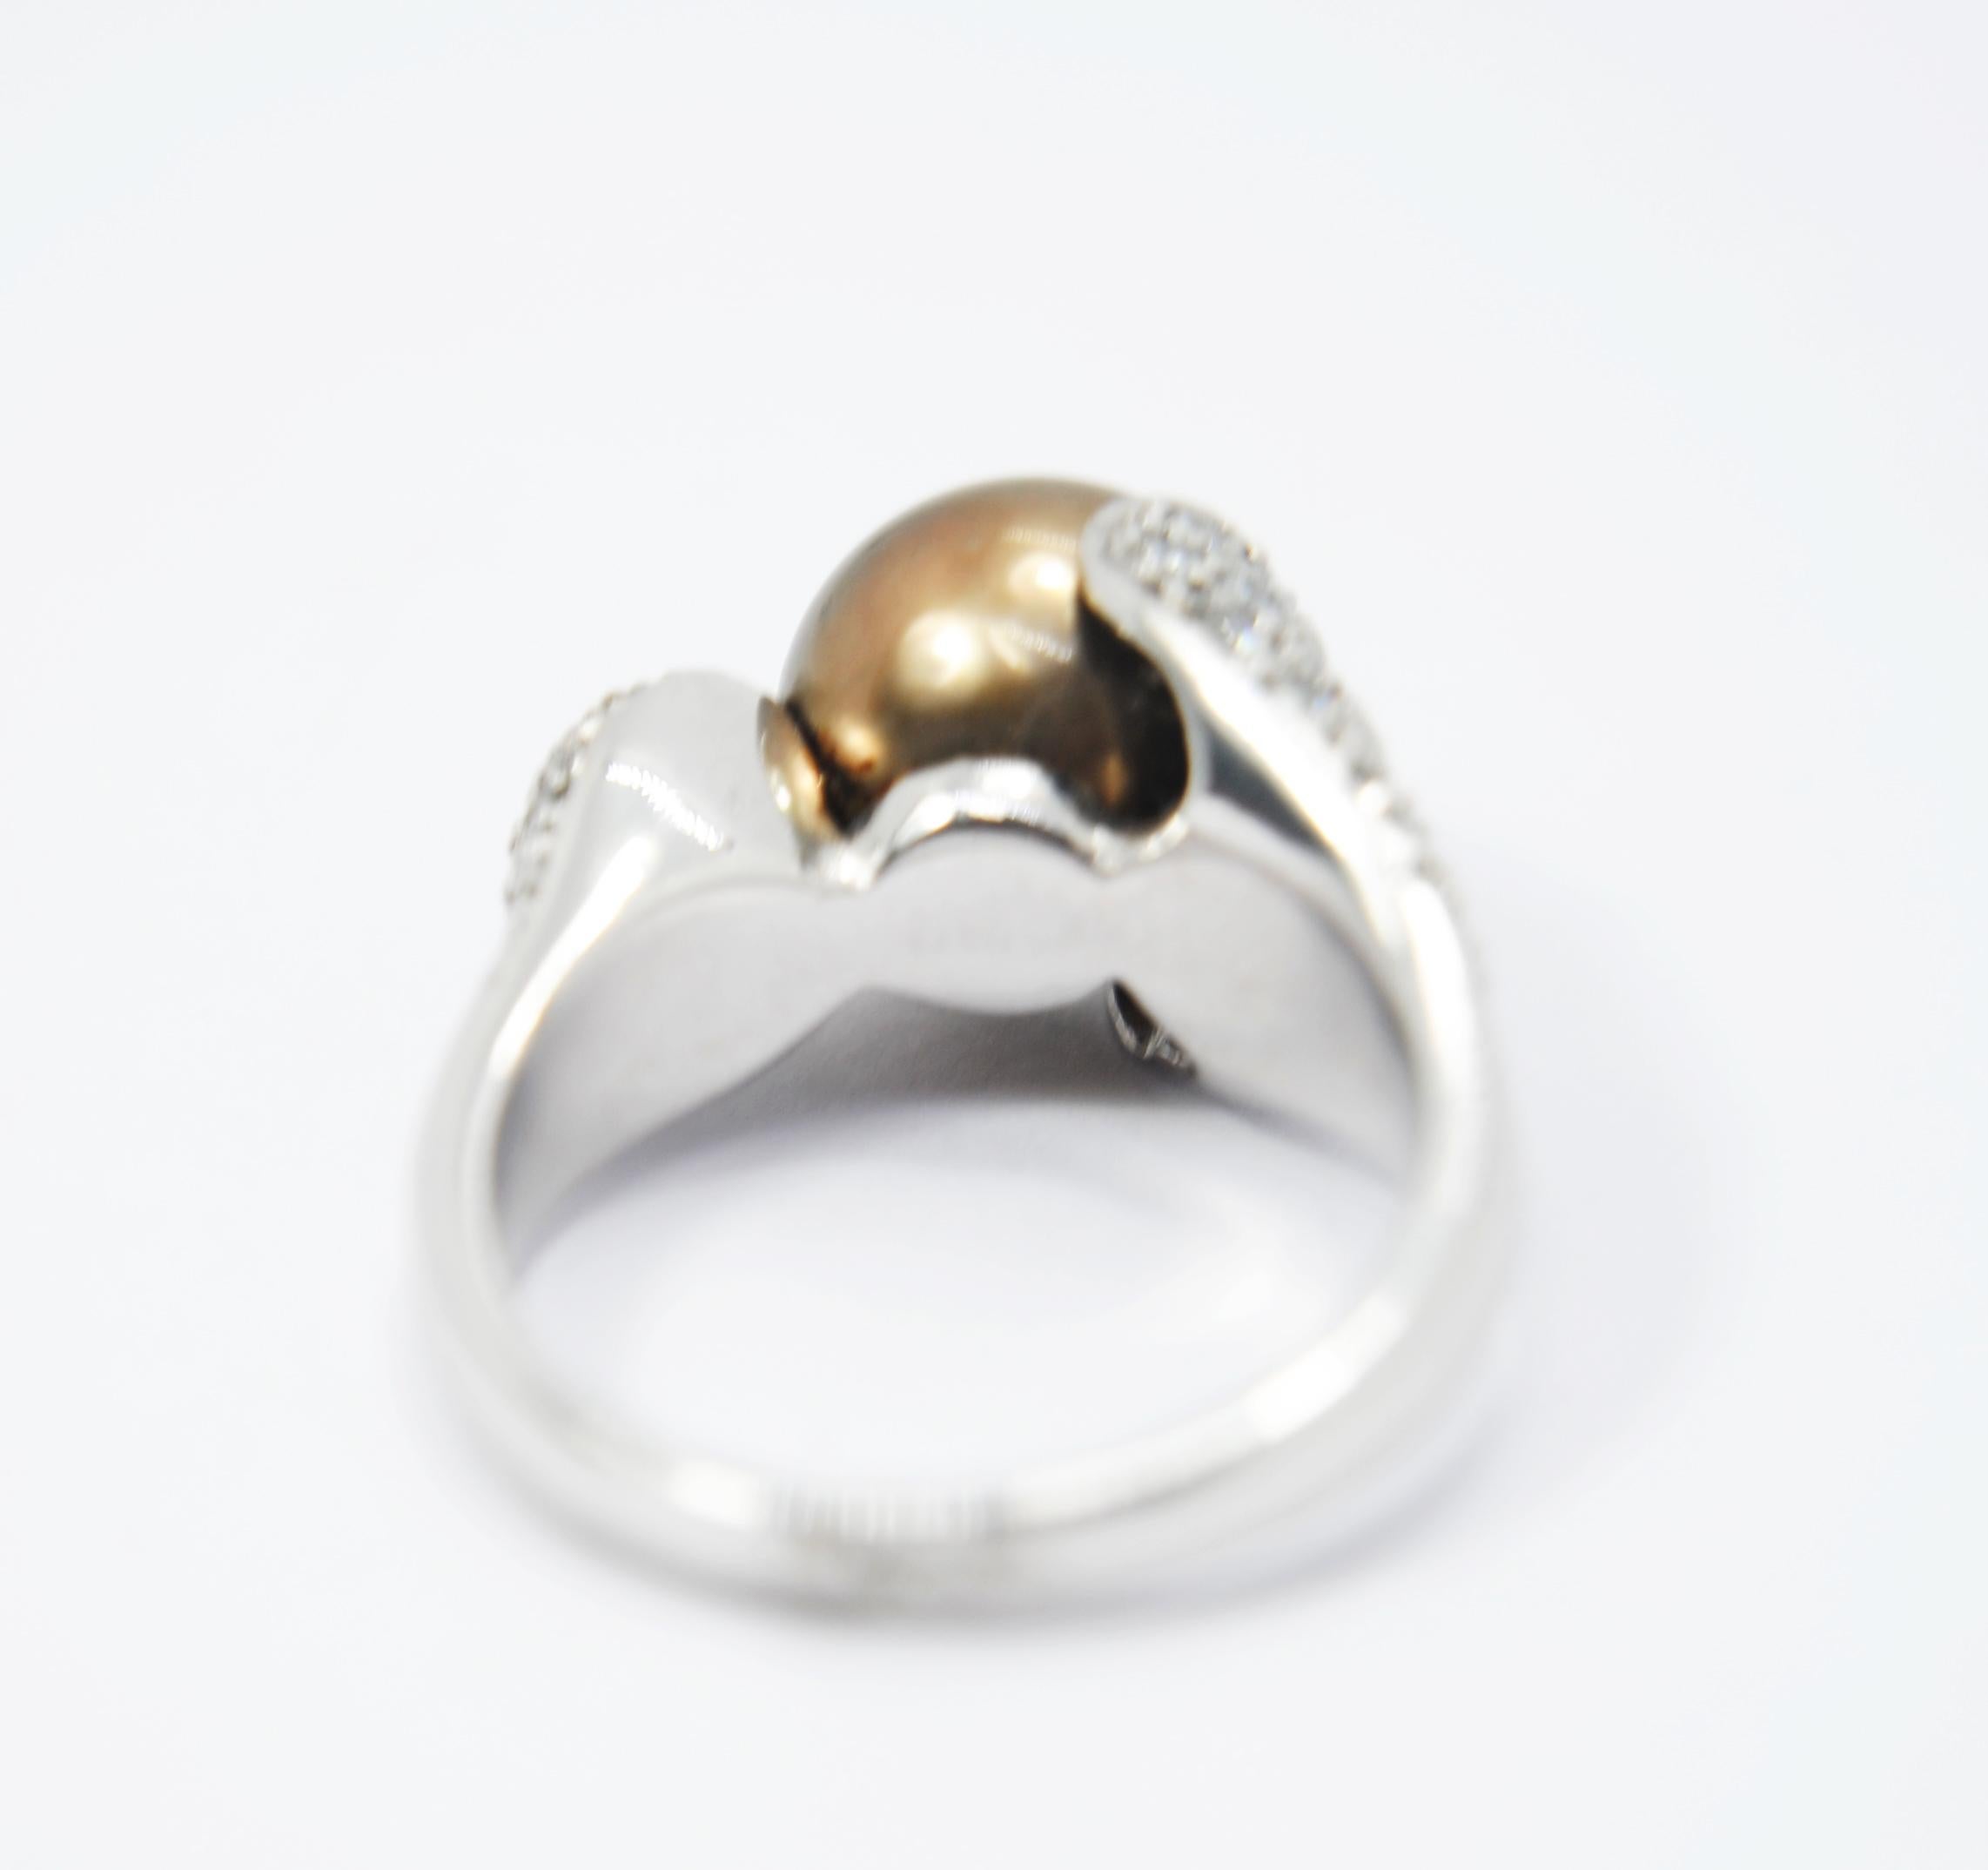 Contemporary Pradera Tahiti Pearl Cocktail Ring with White Diamonds and 18 Karat White Gold For Sale